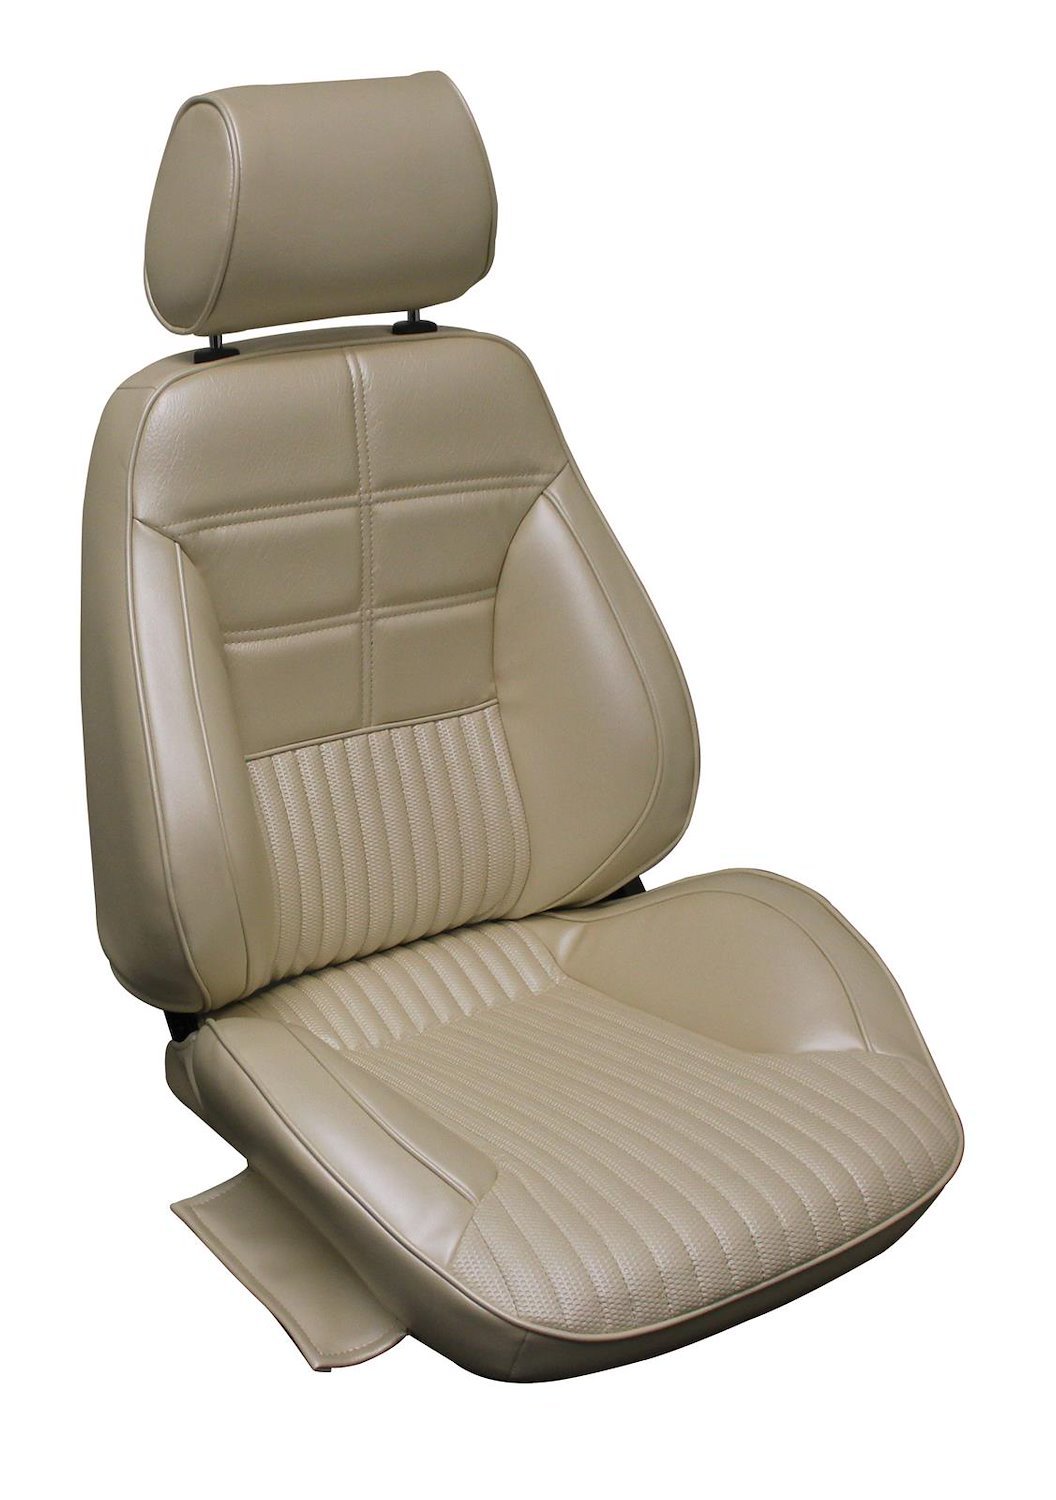 1970 Ford Mustang Deluxe and Grande Interior Blue Touring II Preassembled Reclining Front Bucket Seats